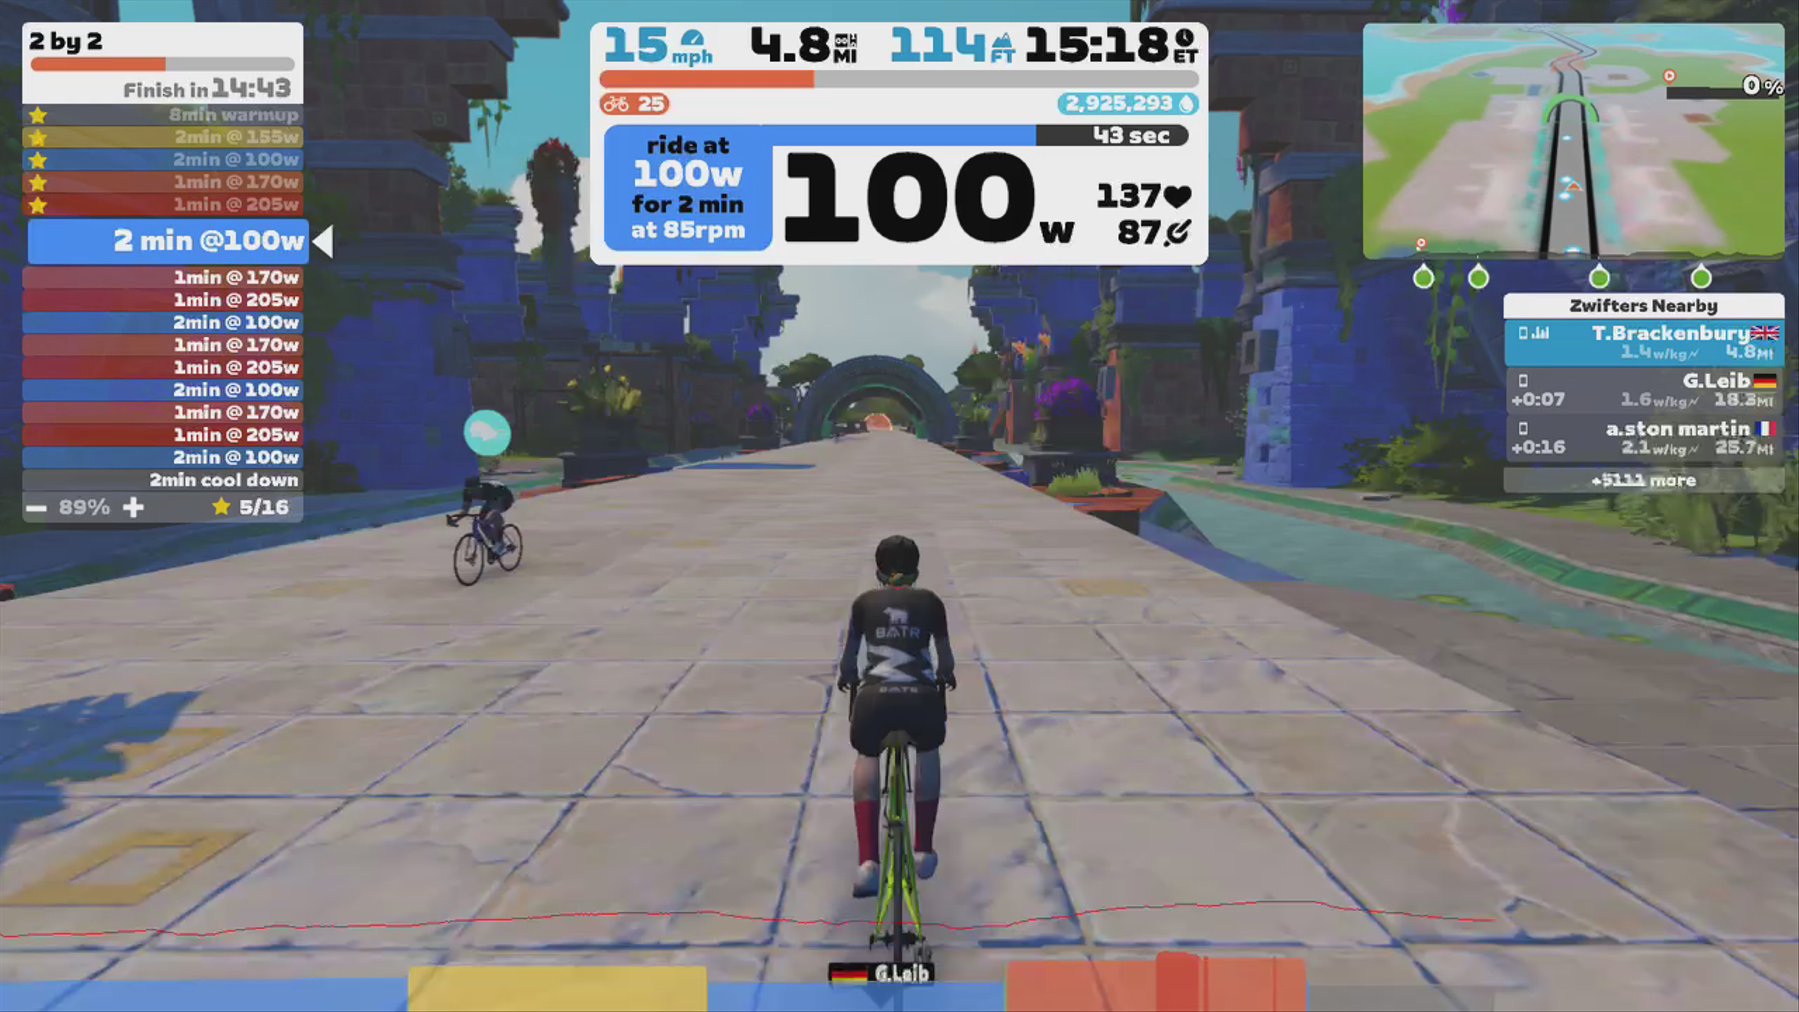 Zwift - Workout of the Week | 2 by 2 on The Big Ring in Watopia